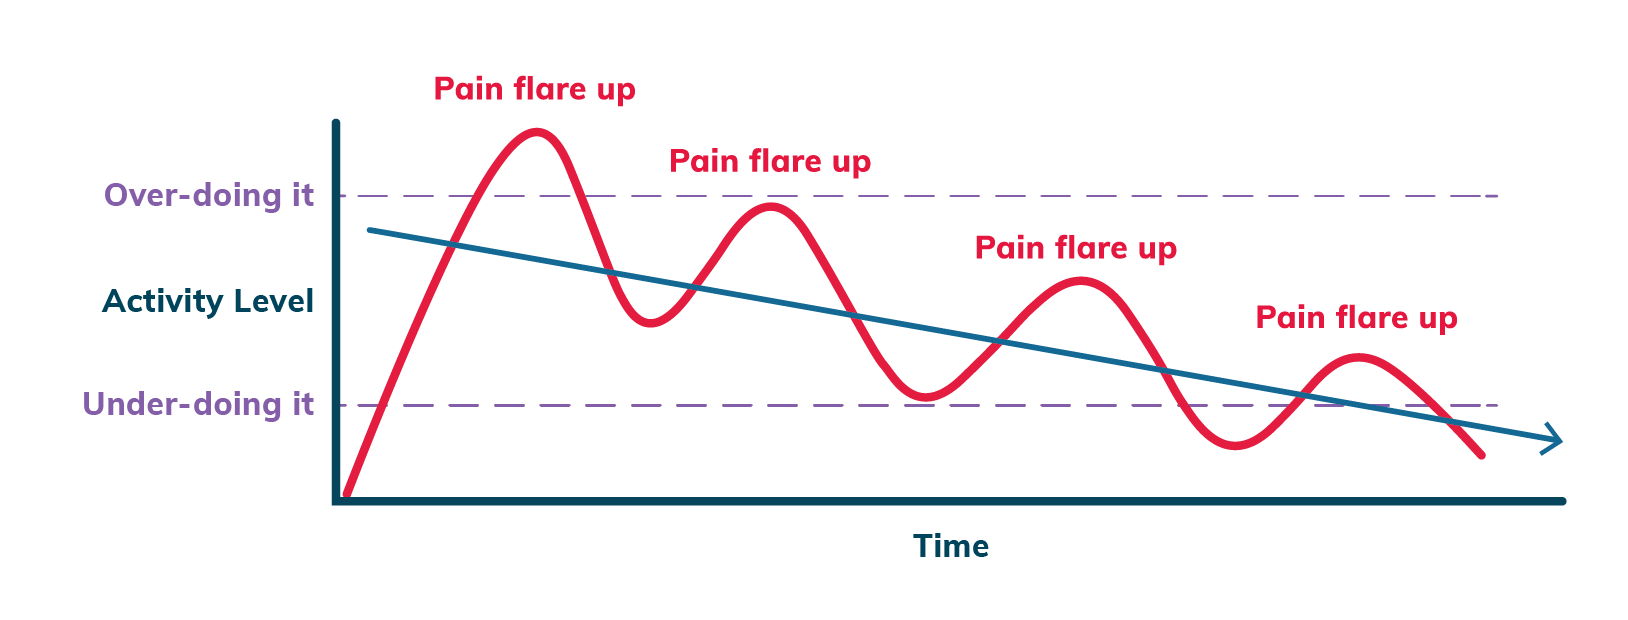 Boom and bust cycle of pain